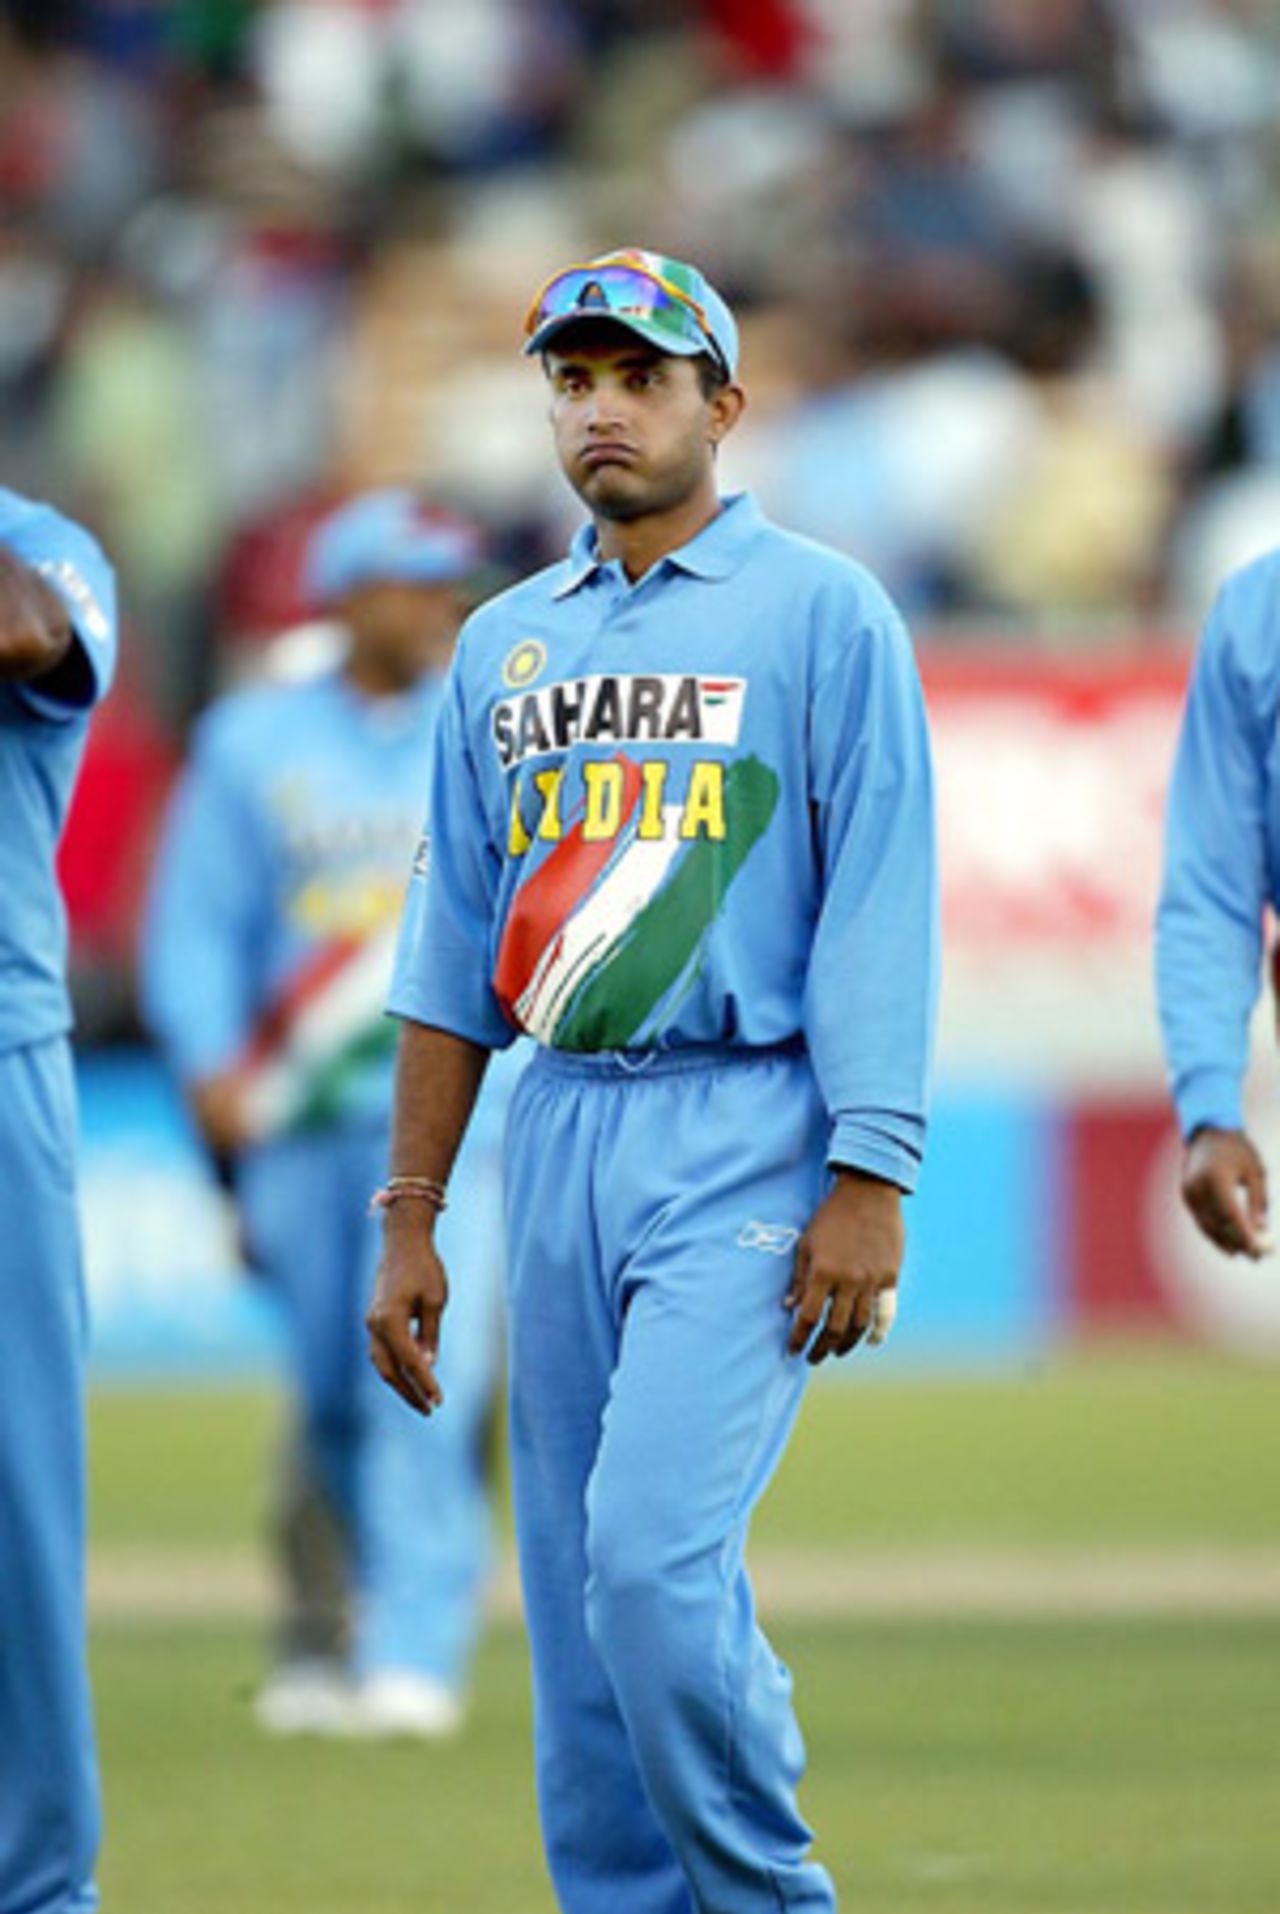 Indian captain Sourav Ganguly shows his disappointment at losing the match. India lost to New Zealand by five wickets to go 3-0 down in the seven-match series. 3rd ODI: New Zealand v India at Jade Stadium, Christchurch, 1 January 2003.